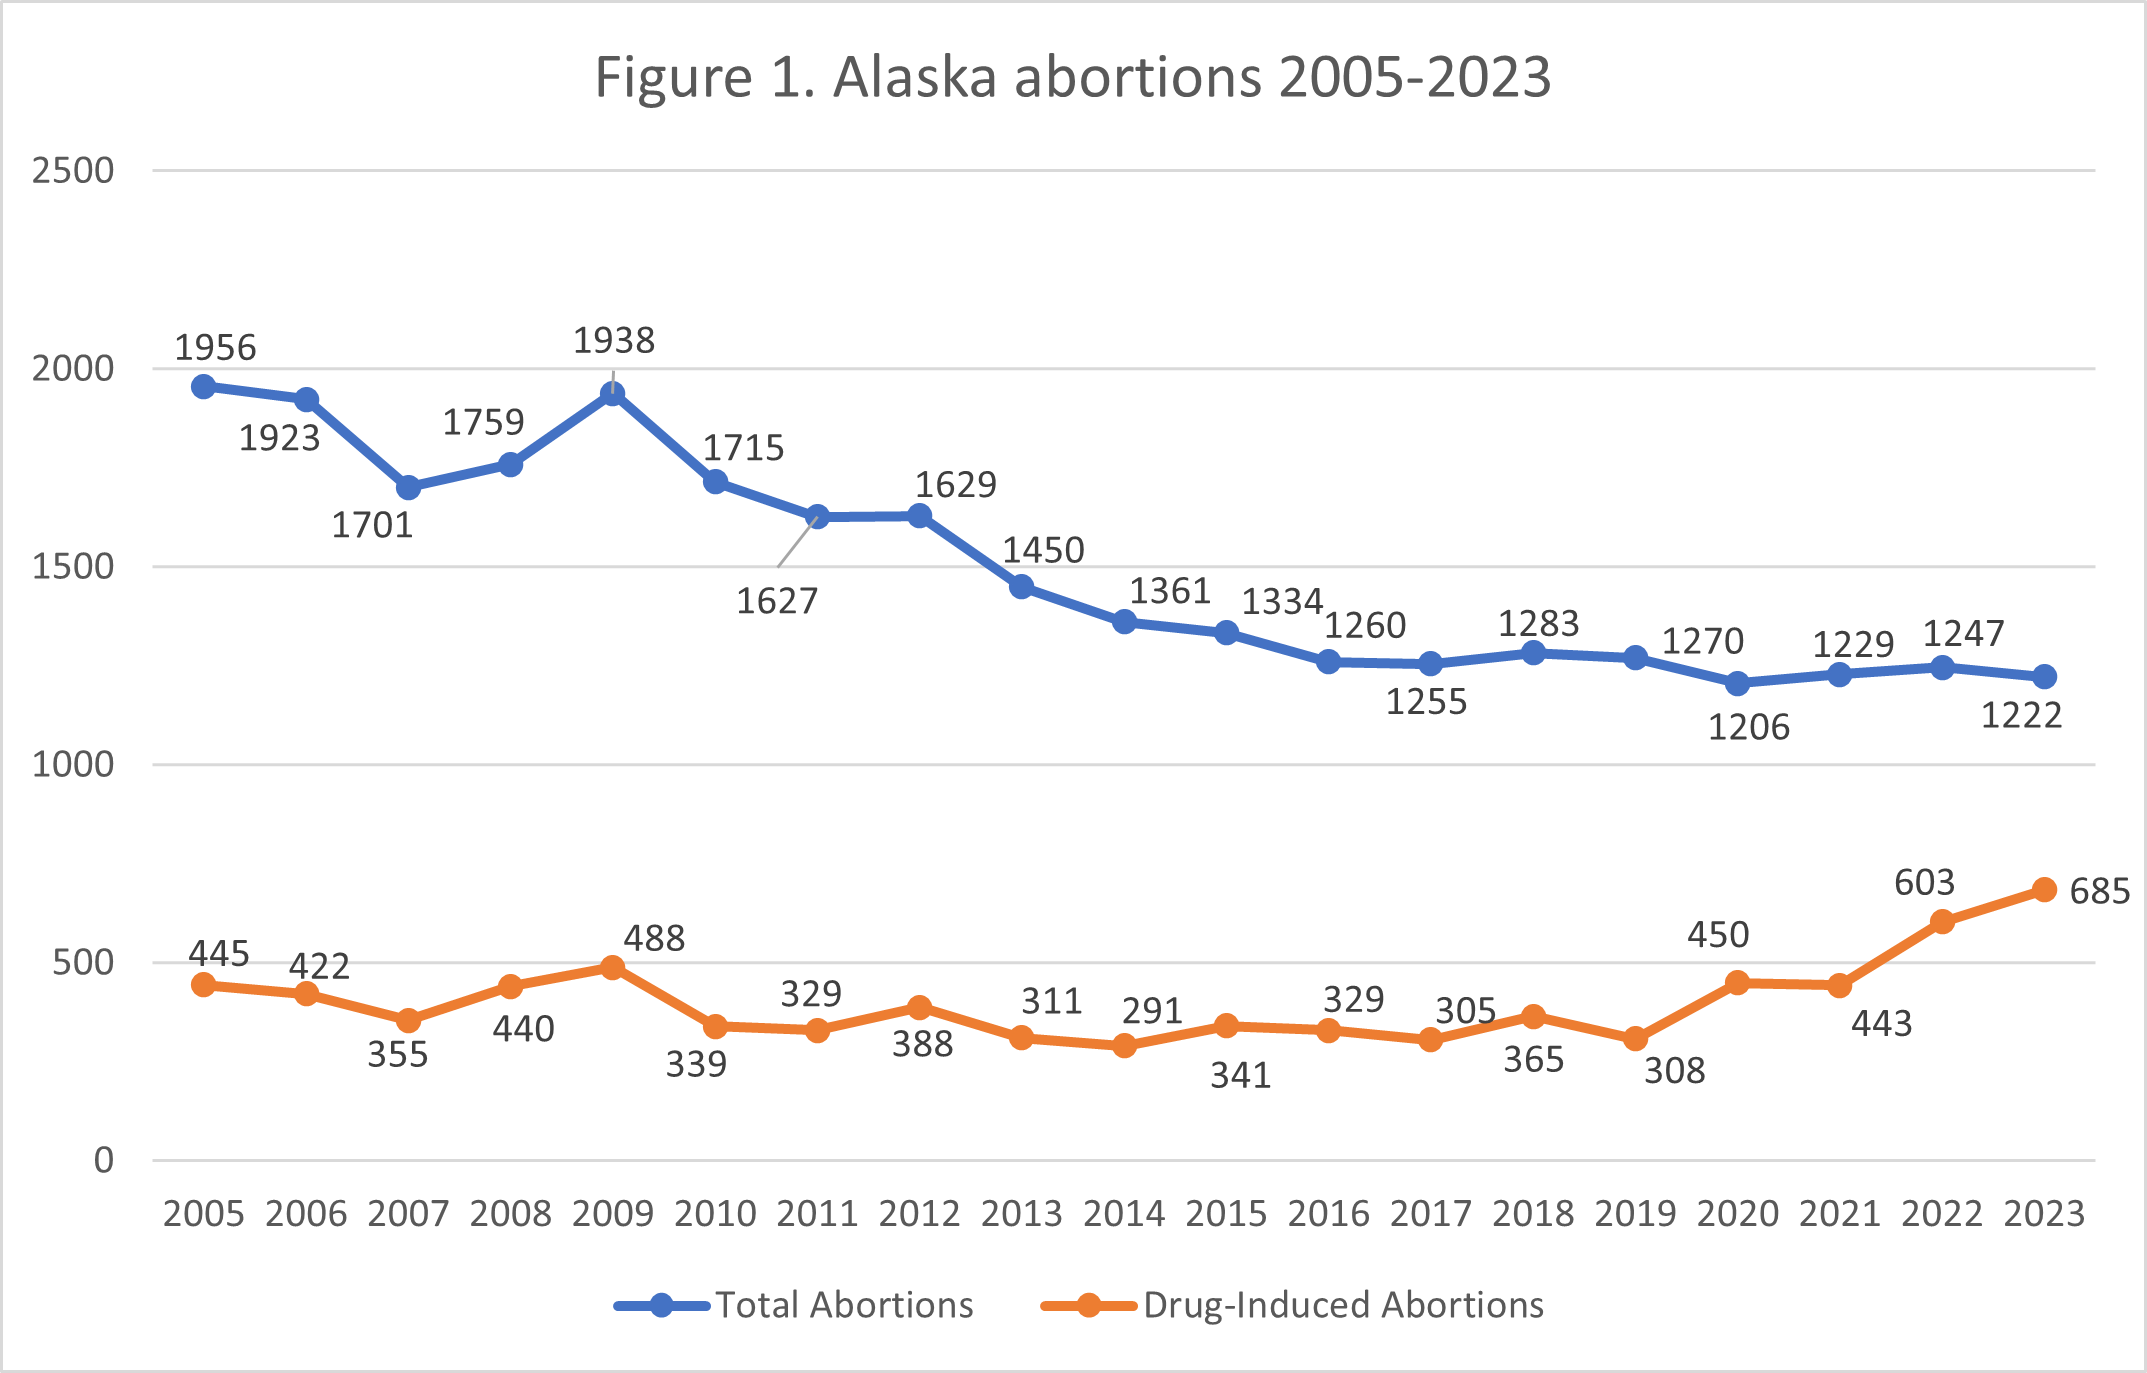 Alaska Abortions Decline as More Babies are Saved